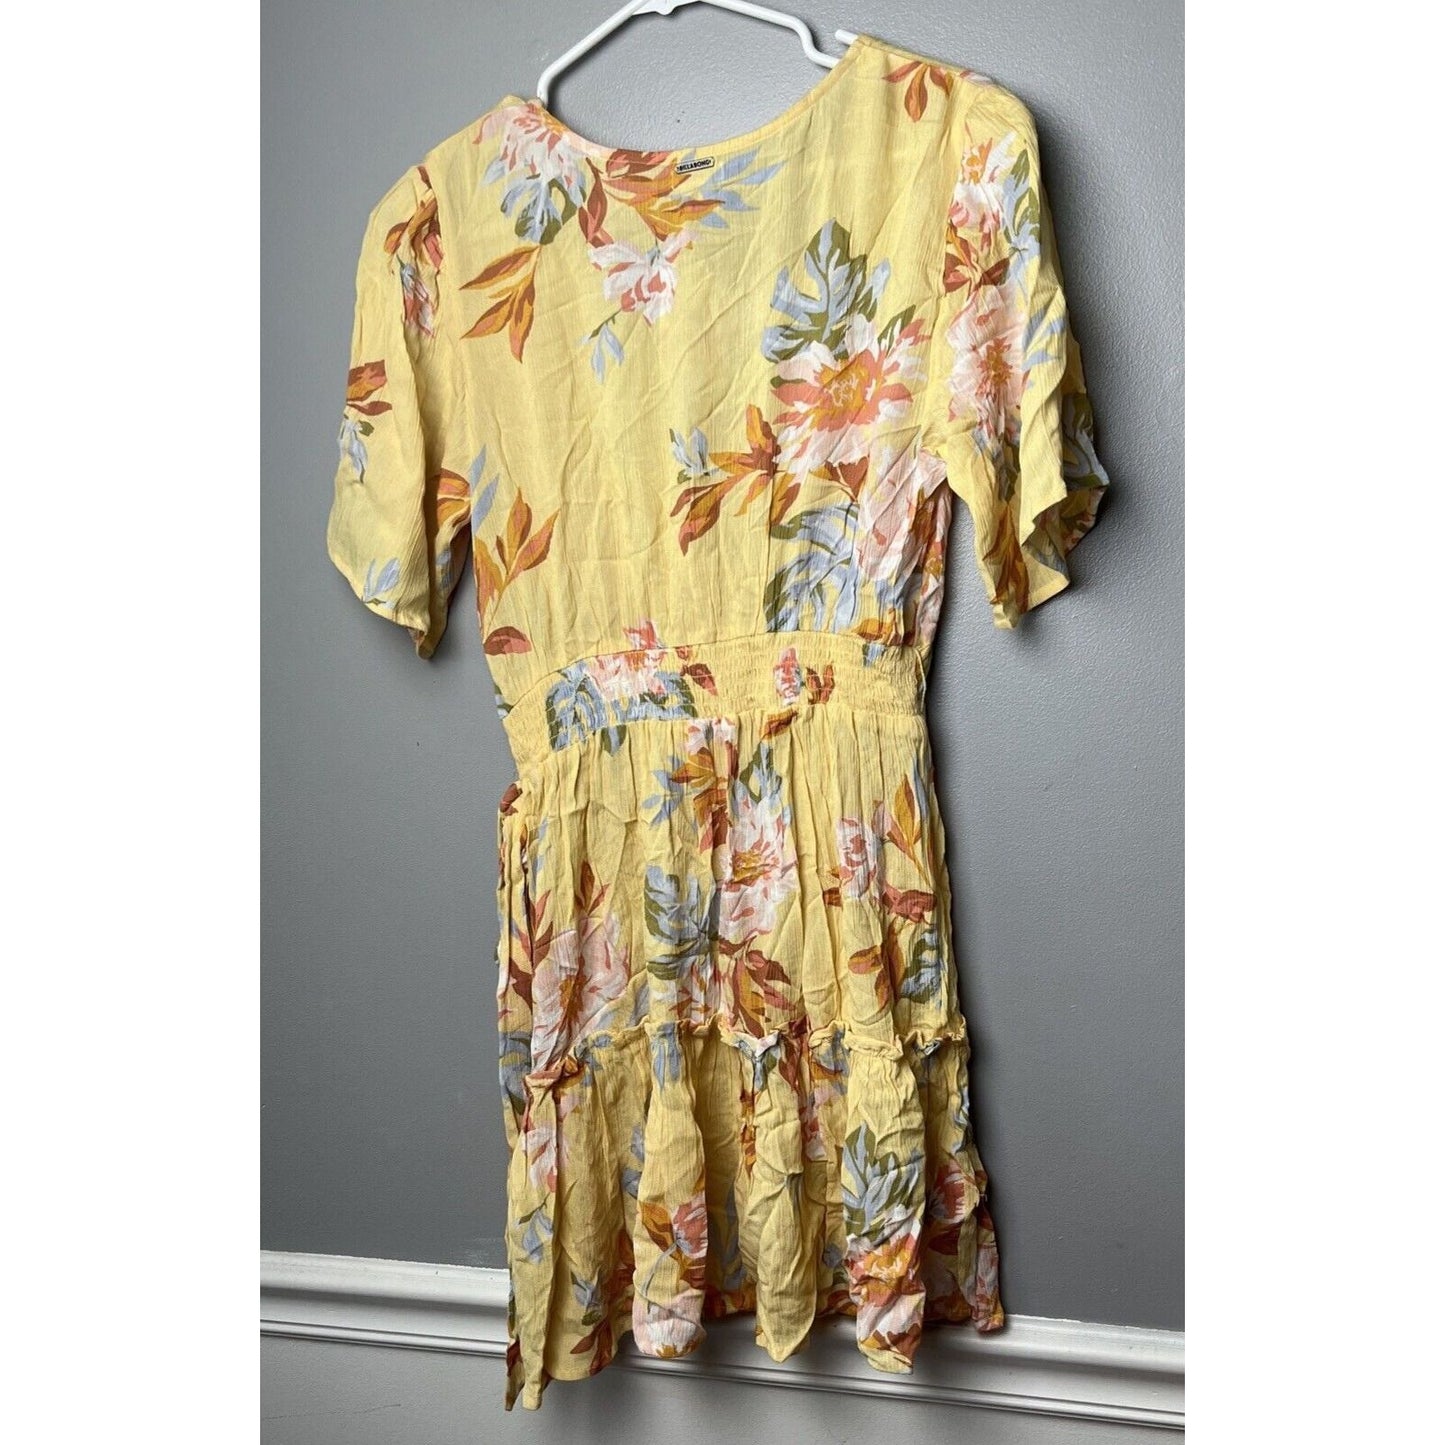 $70 Billabong Women’s One And Only Dress Mimosa Yellow Size M